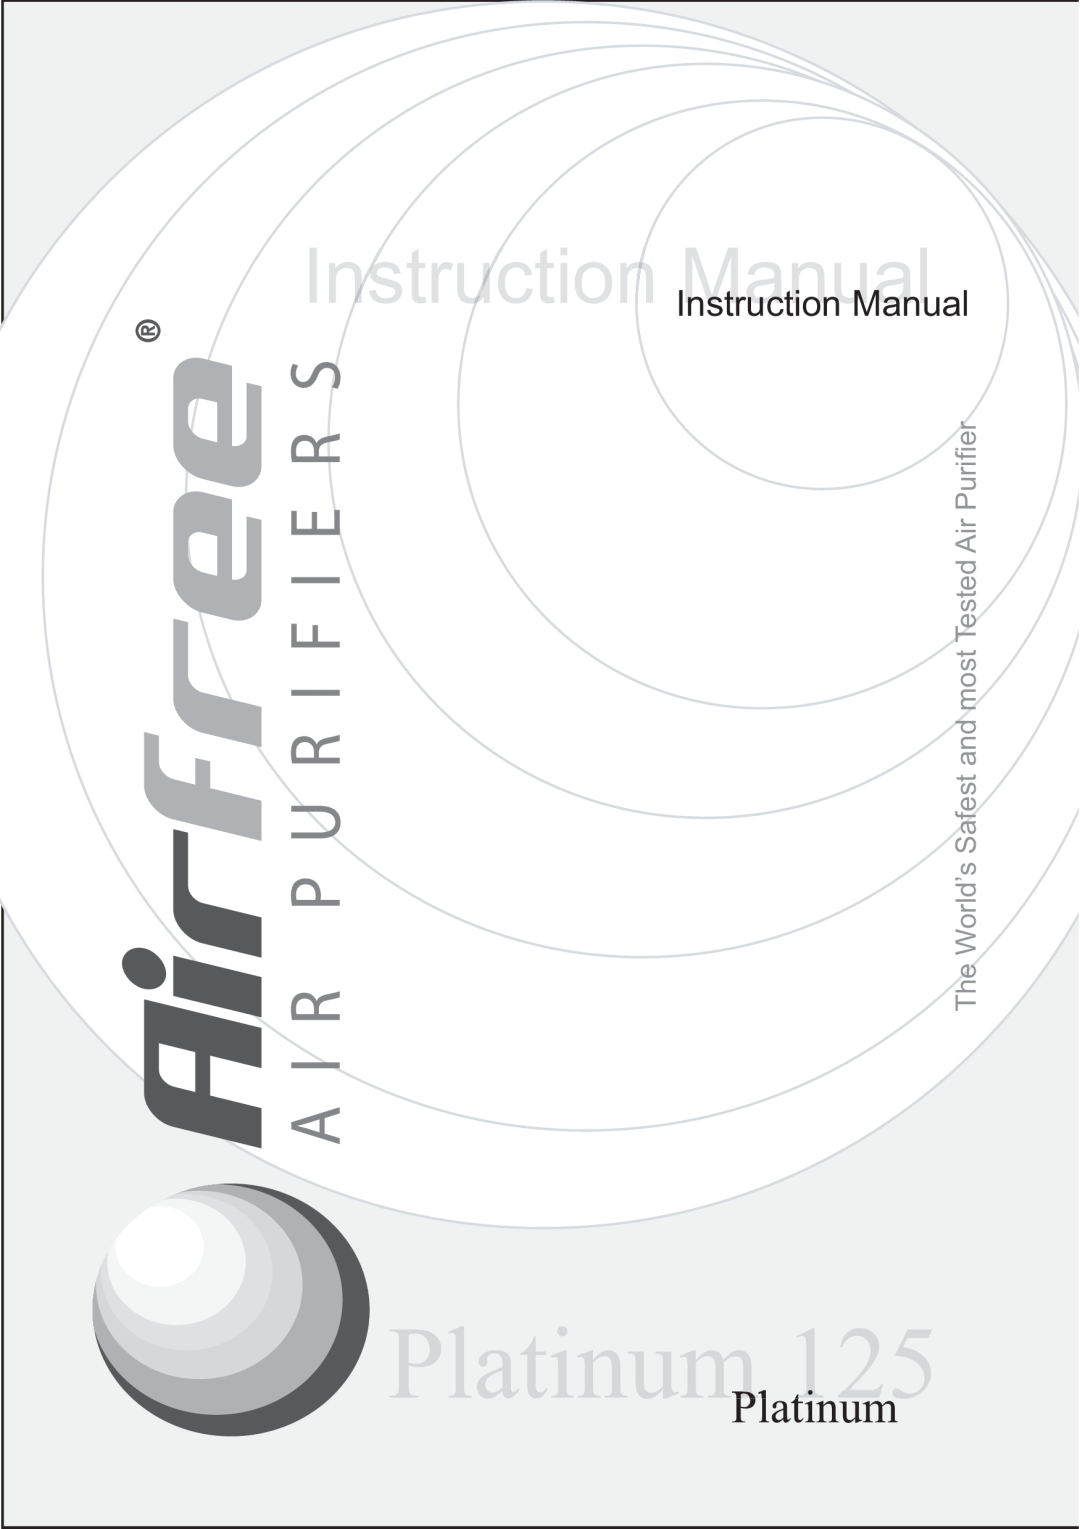 Airfree Platinum 125 instruction manual Instruuctionn Manual, The World’s Safest and most Tested Air Puriﬁer 